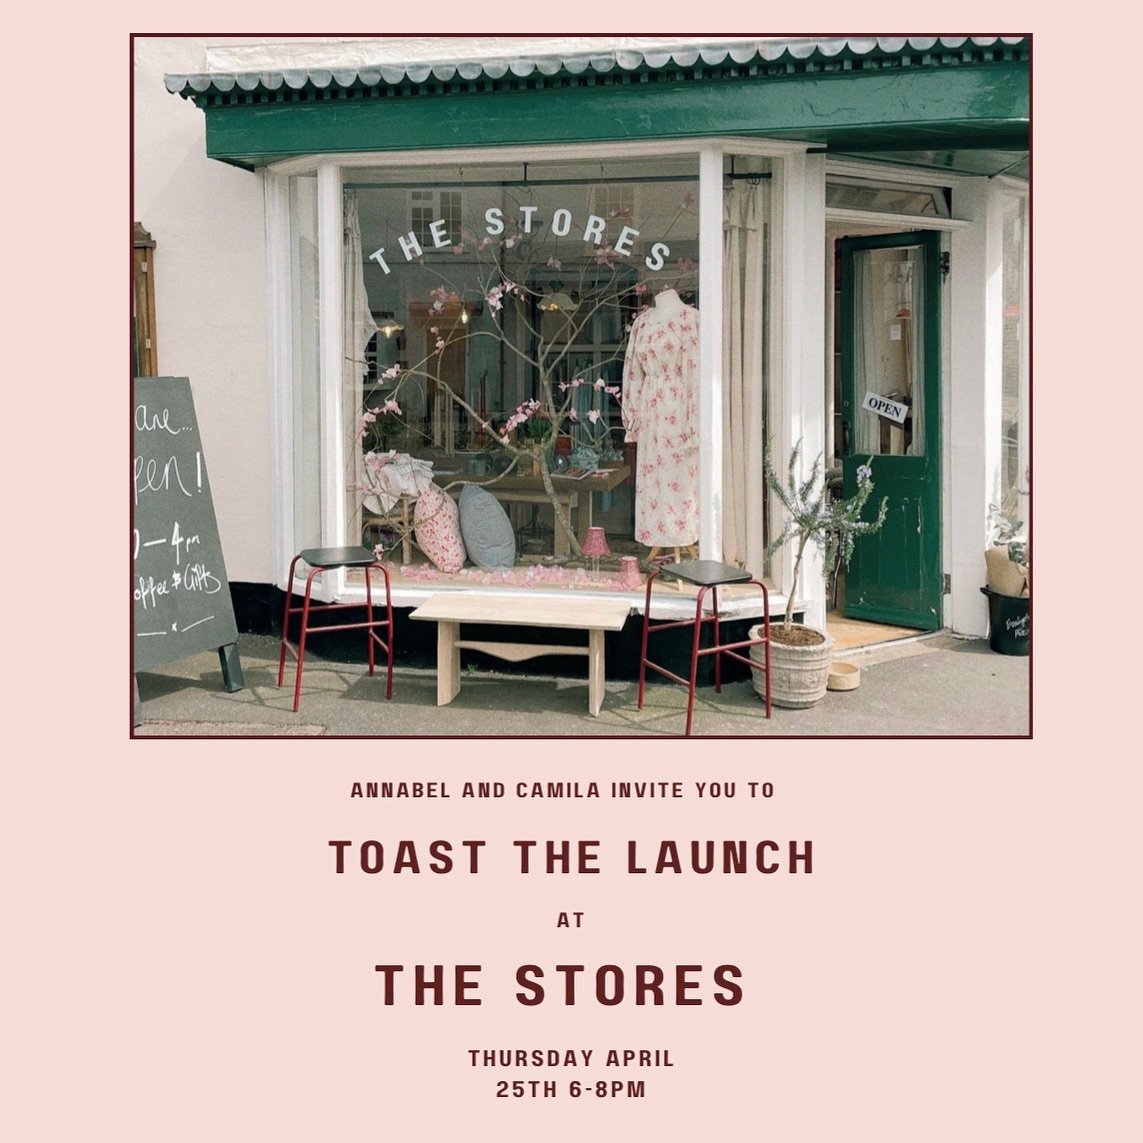 We&rsquo;d like to invite you to celebrate the official opening of The Stores! Join us for bubbles and canap&eacute;s from 6-8pm. 
Annabel and Camila x
.
.
.
#hampshiretourism #visitwinchester #winchesterliving #hampshirelife #lovehampshire #hampshir